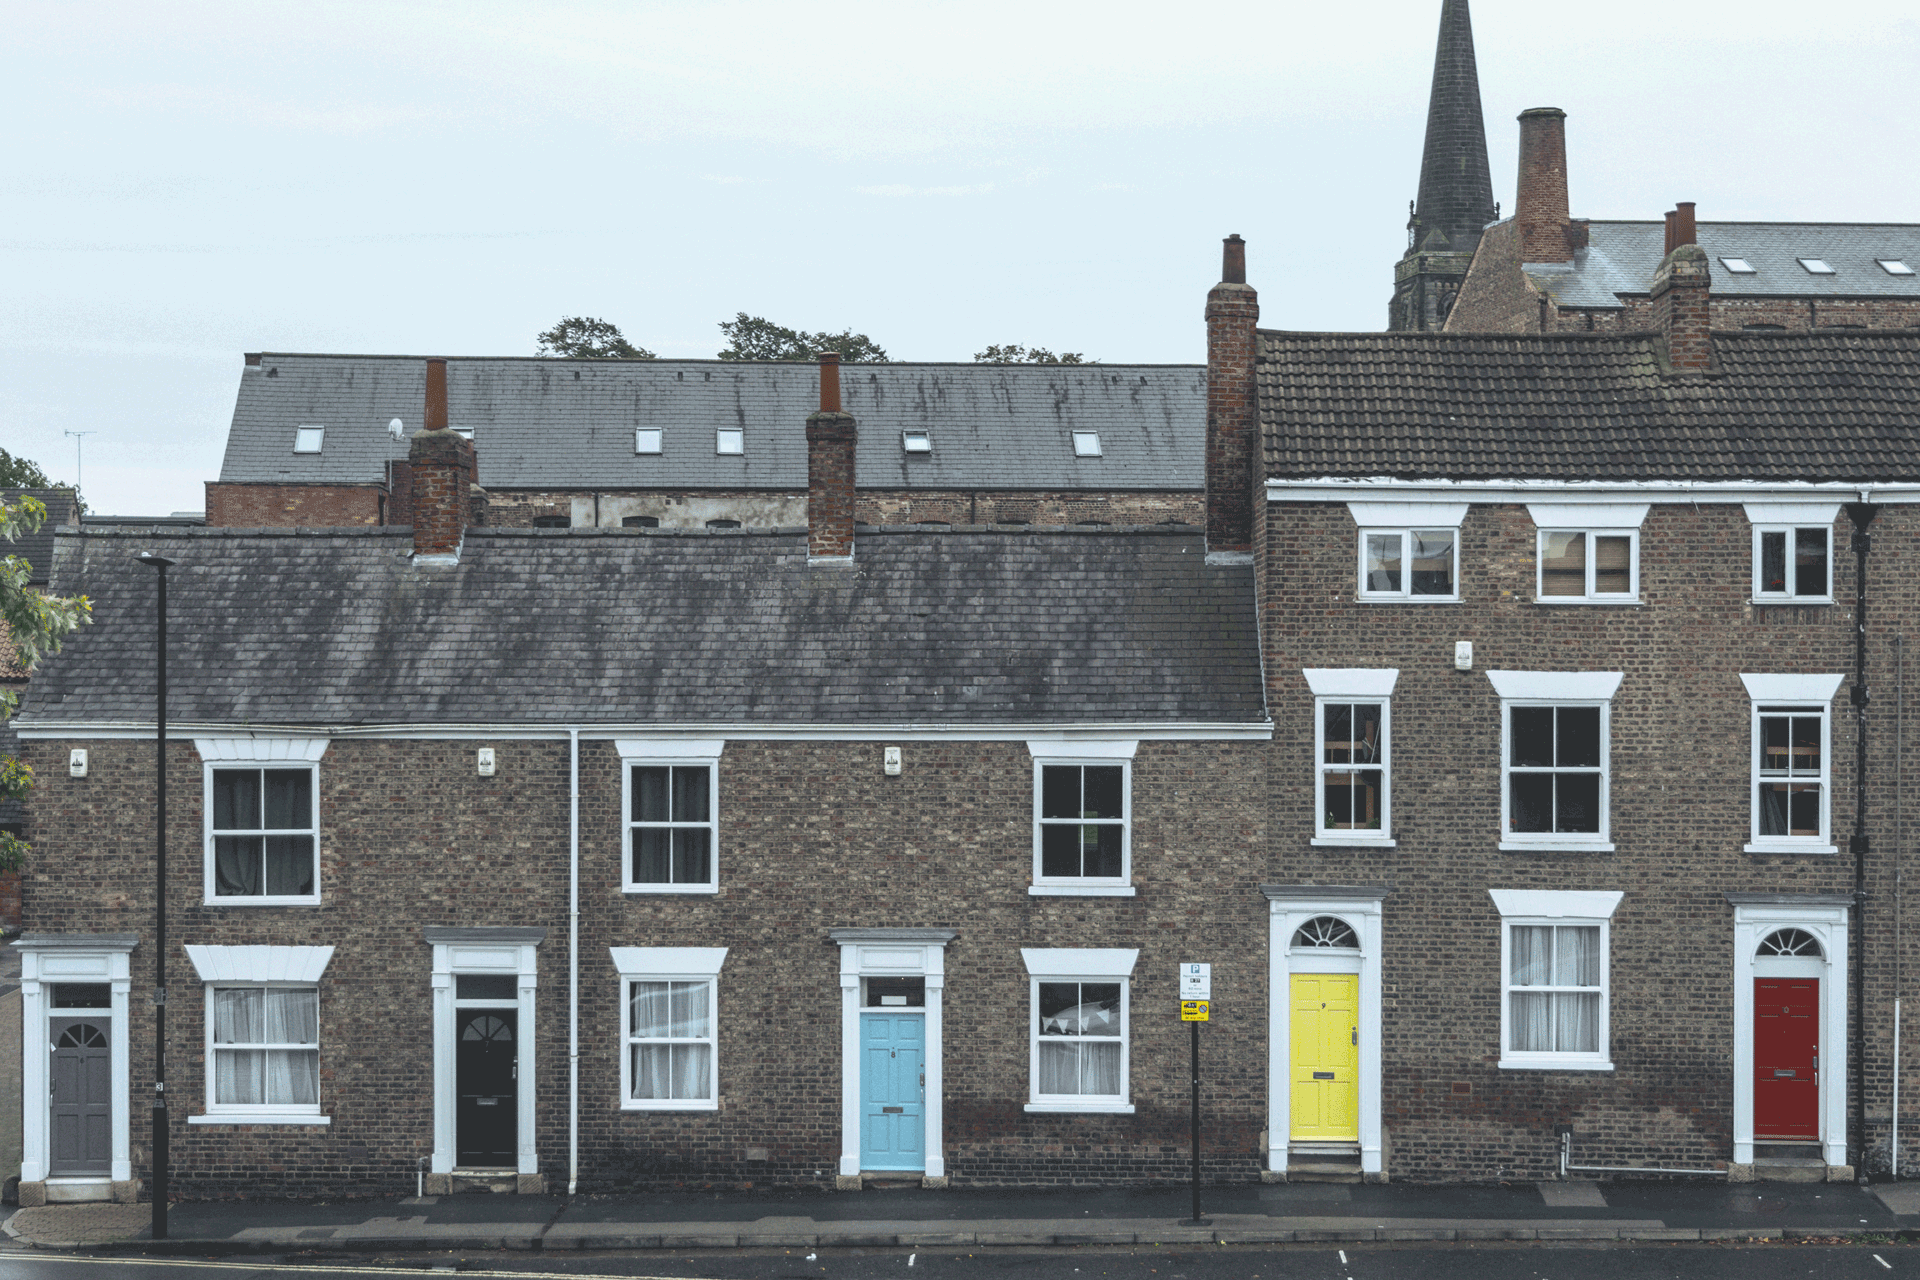 Brick terraced houses with colourful front doors.